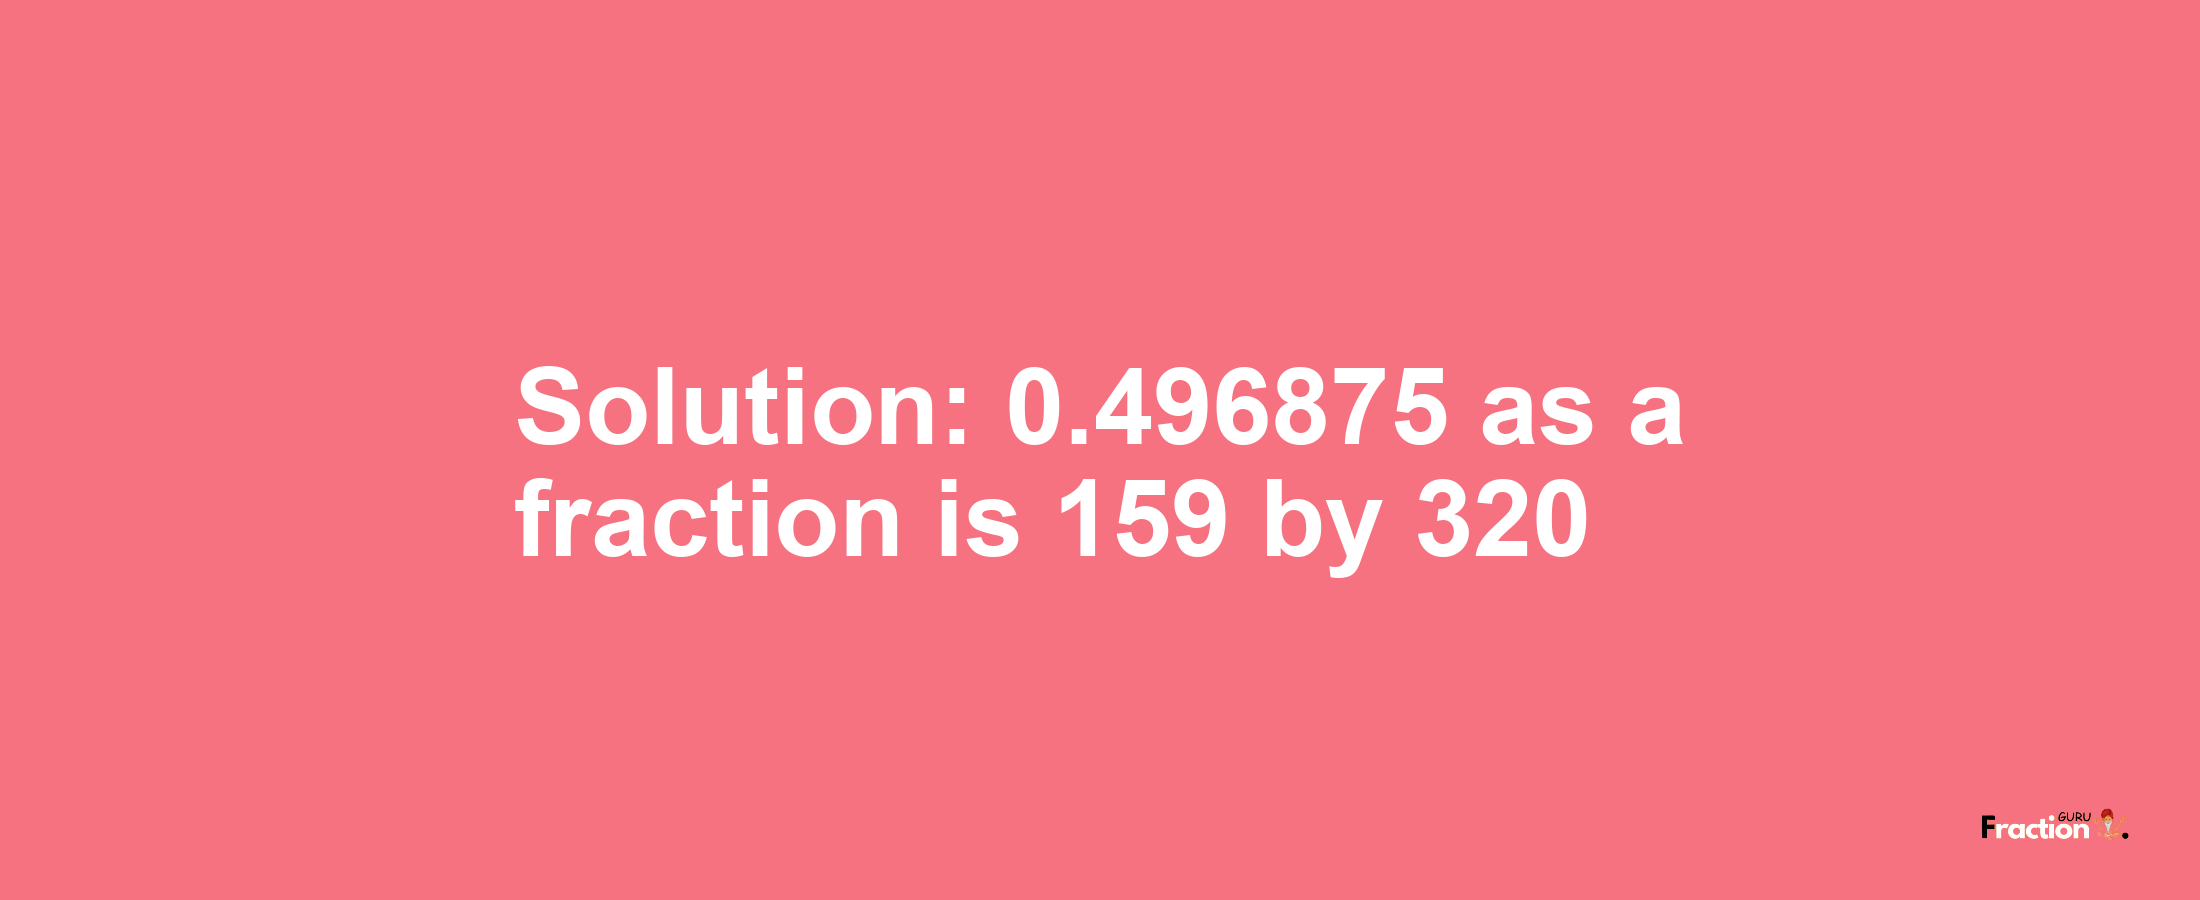 Solution:0.496875 as a fraction is 159/320